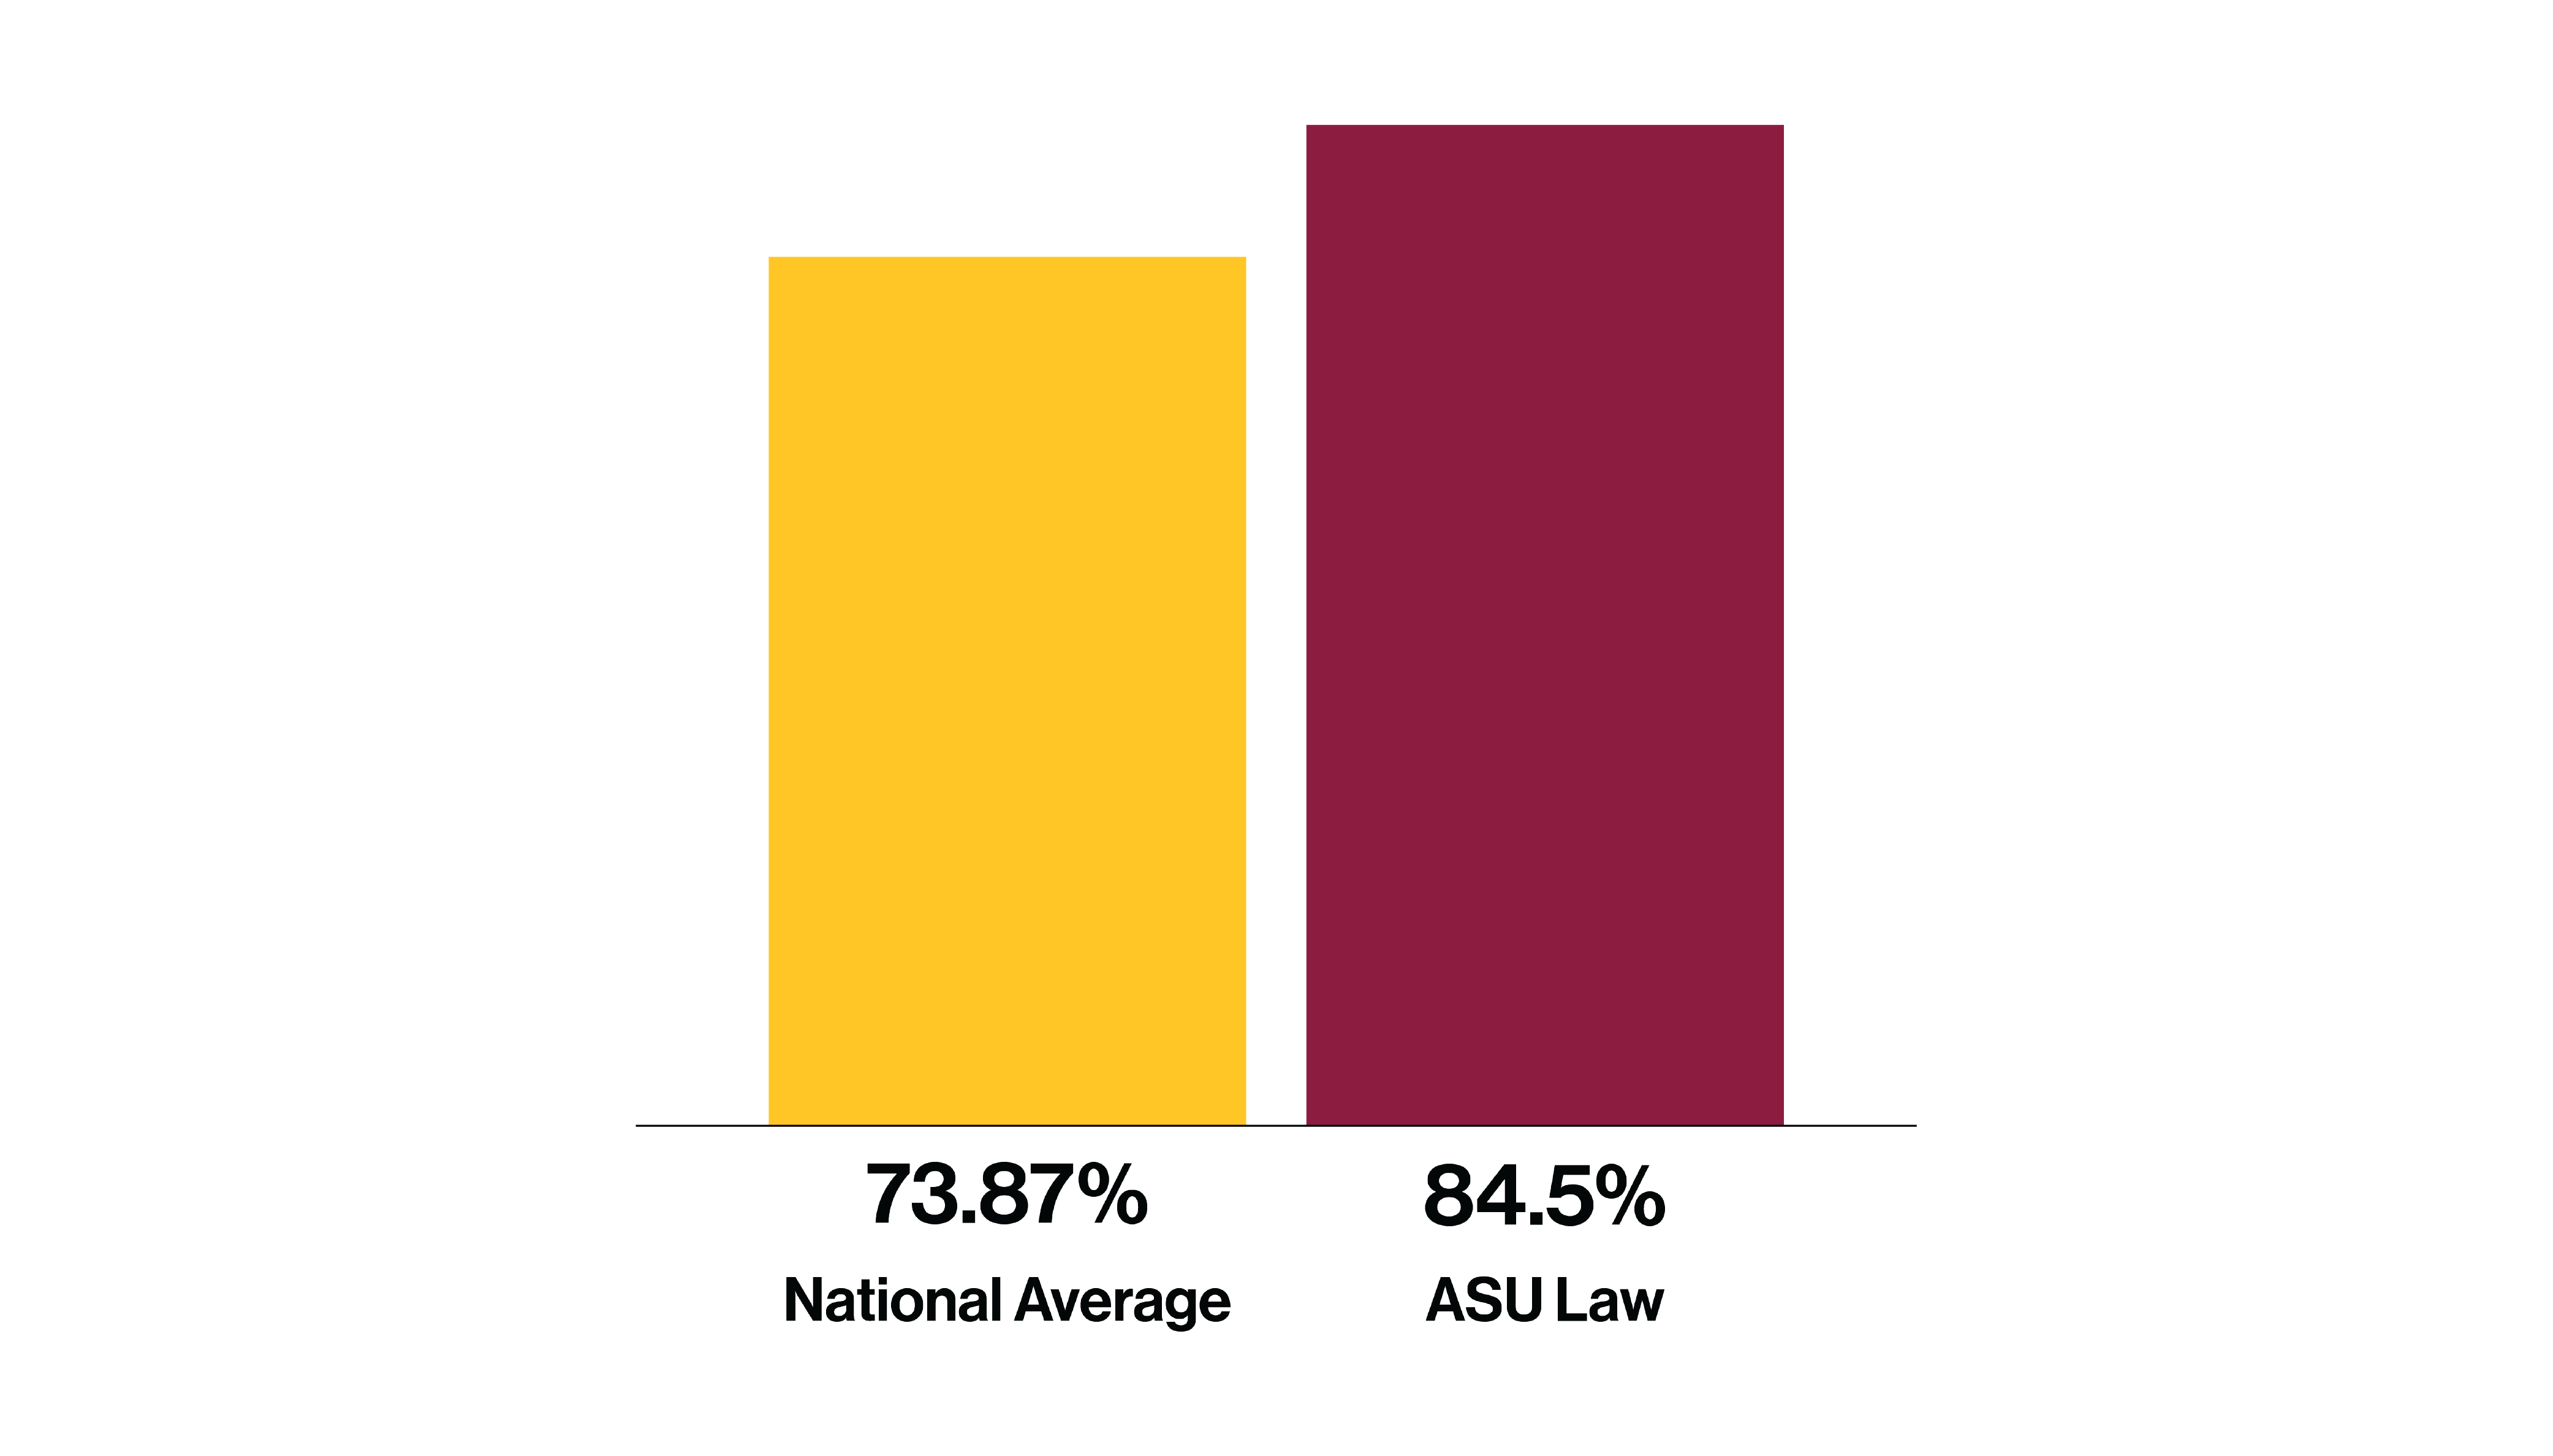 Bar chart show the bar passage rates for 2023: 73.87% National average and 84.5% ASU Law